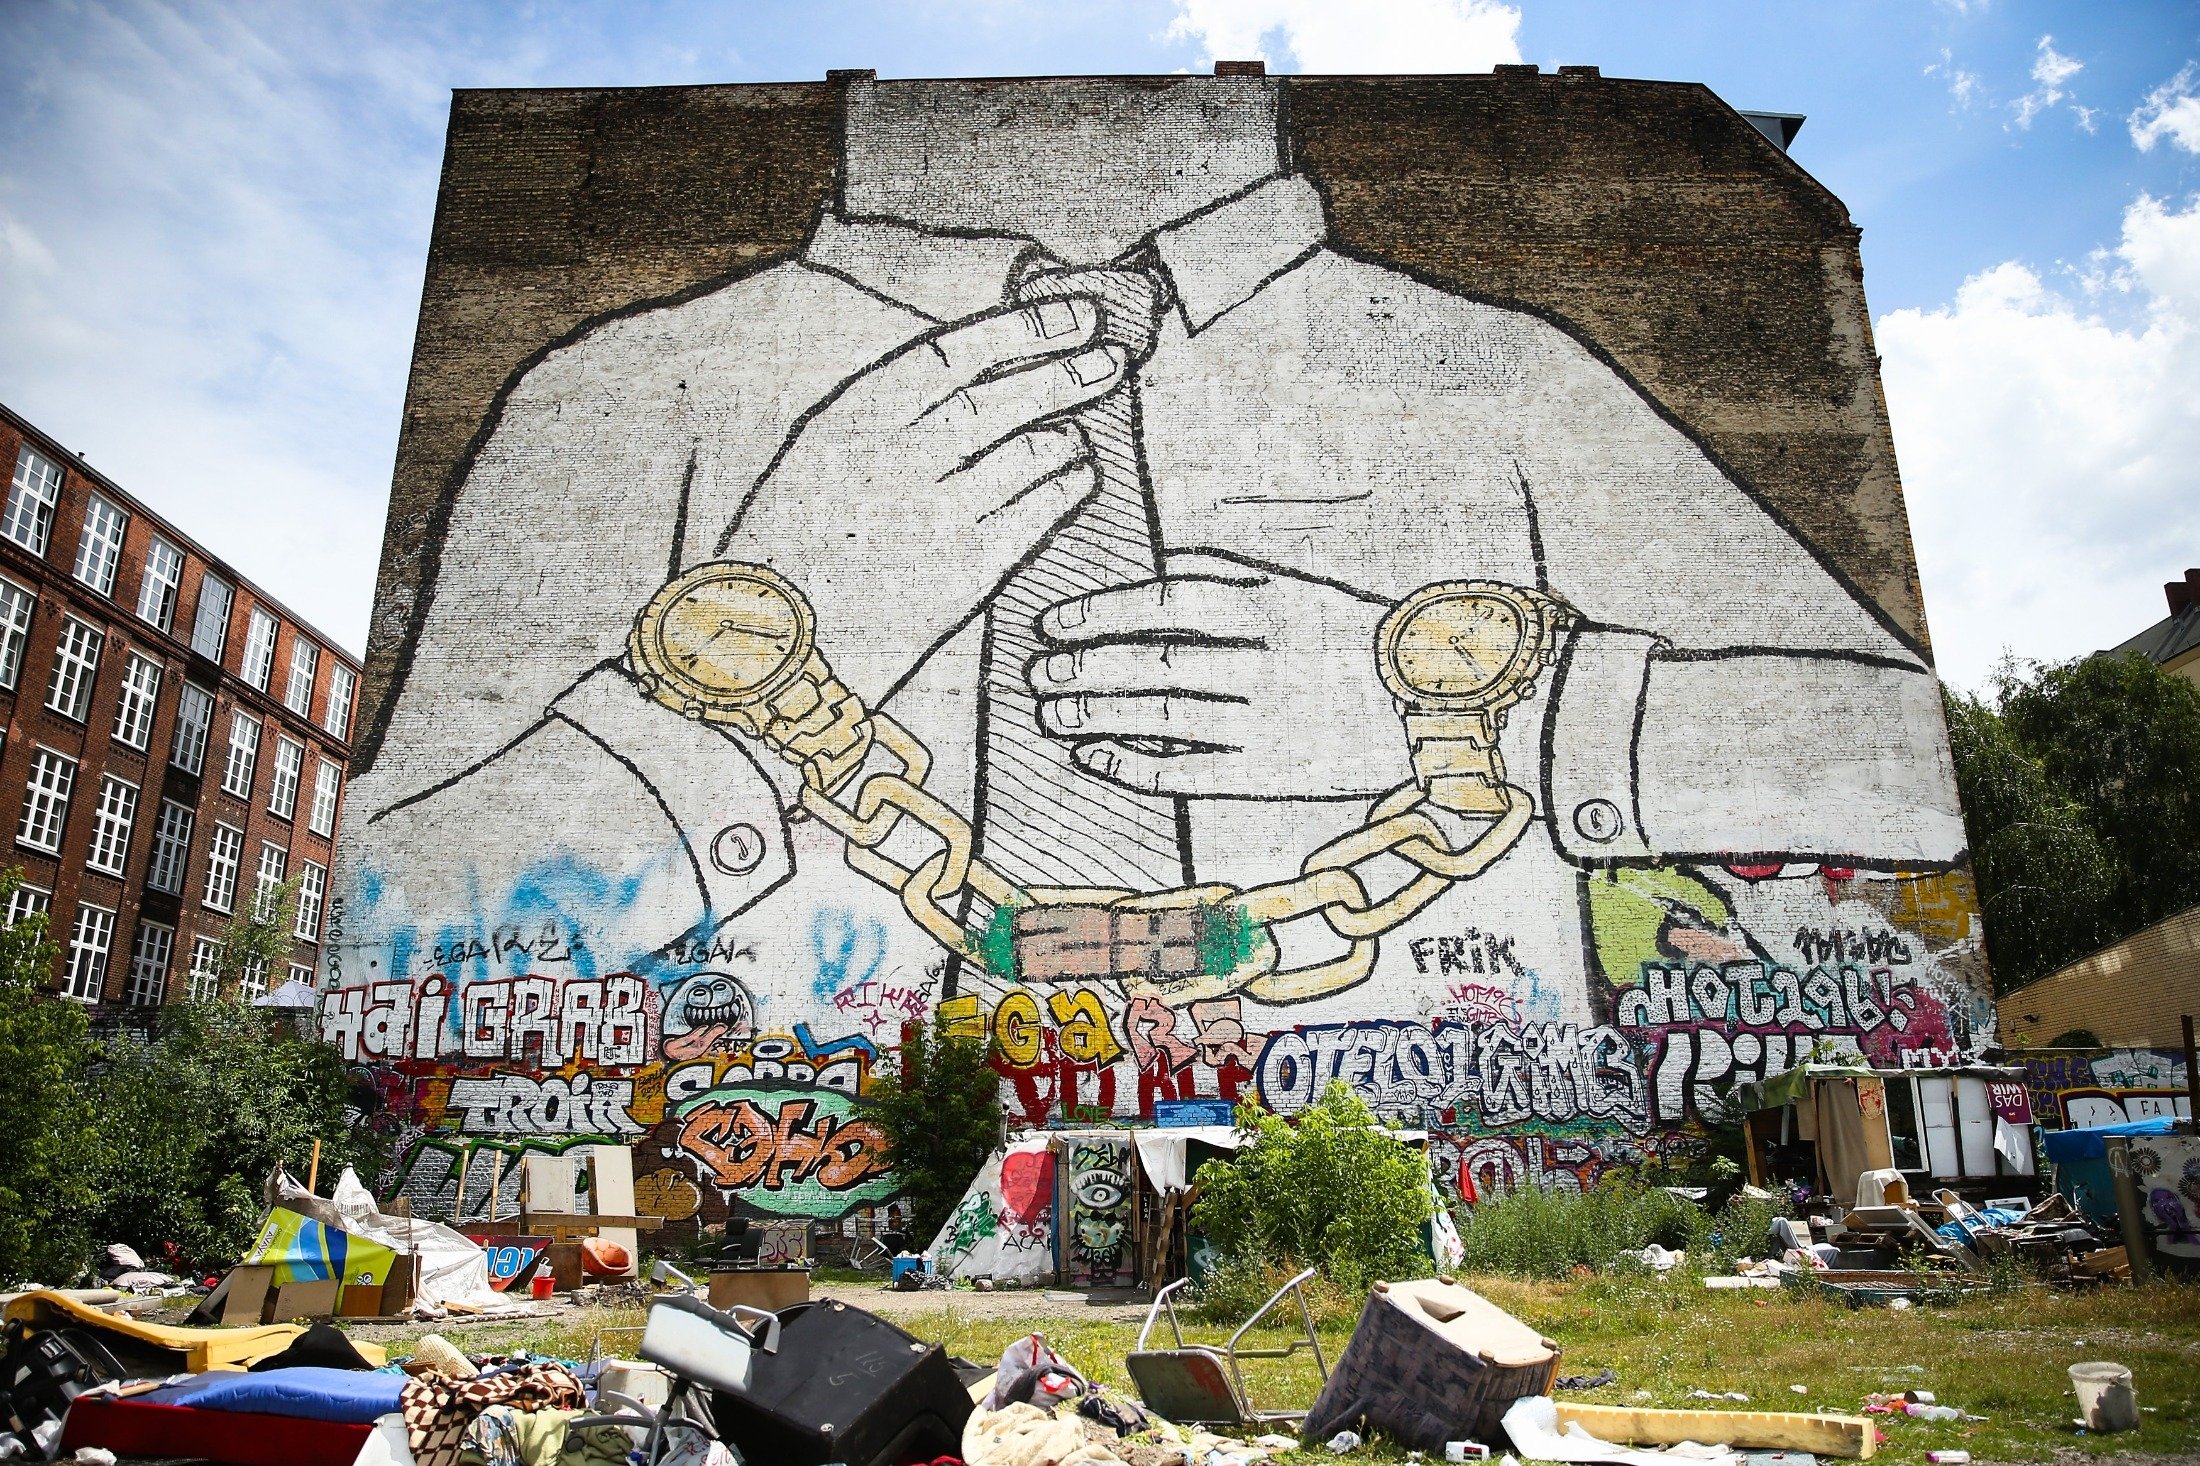 A giant mural depicting a figure wearing a tie and chained to two wristwatches looms over the Cuvrystrasse squat in Kreuzberg district in Berlin, Germany, June 26, 2014. (Getty Images)